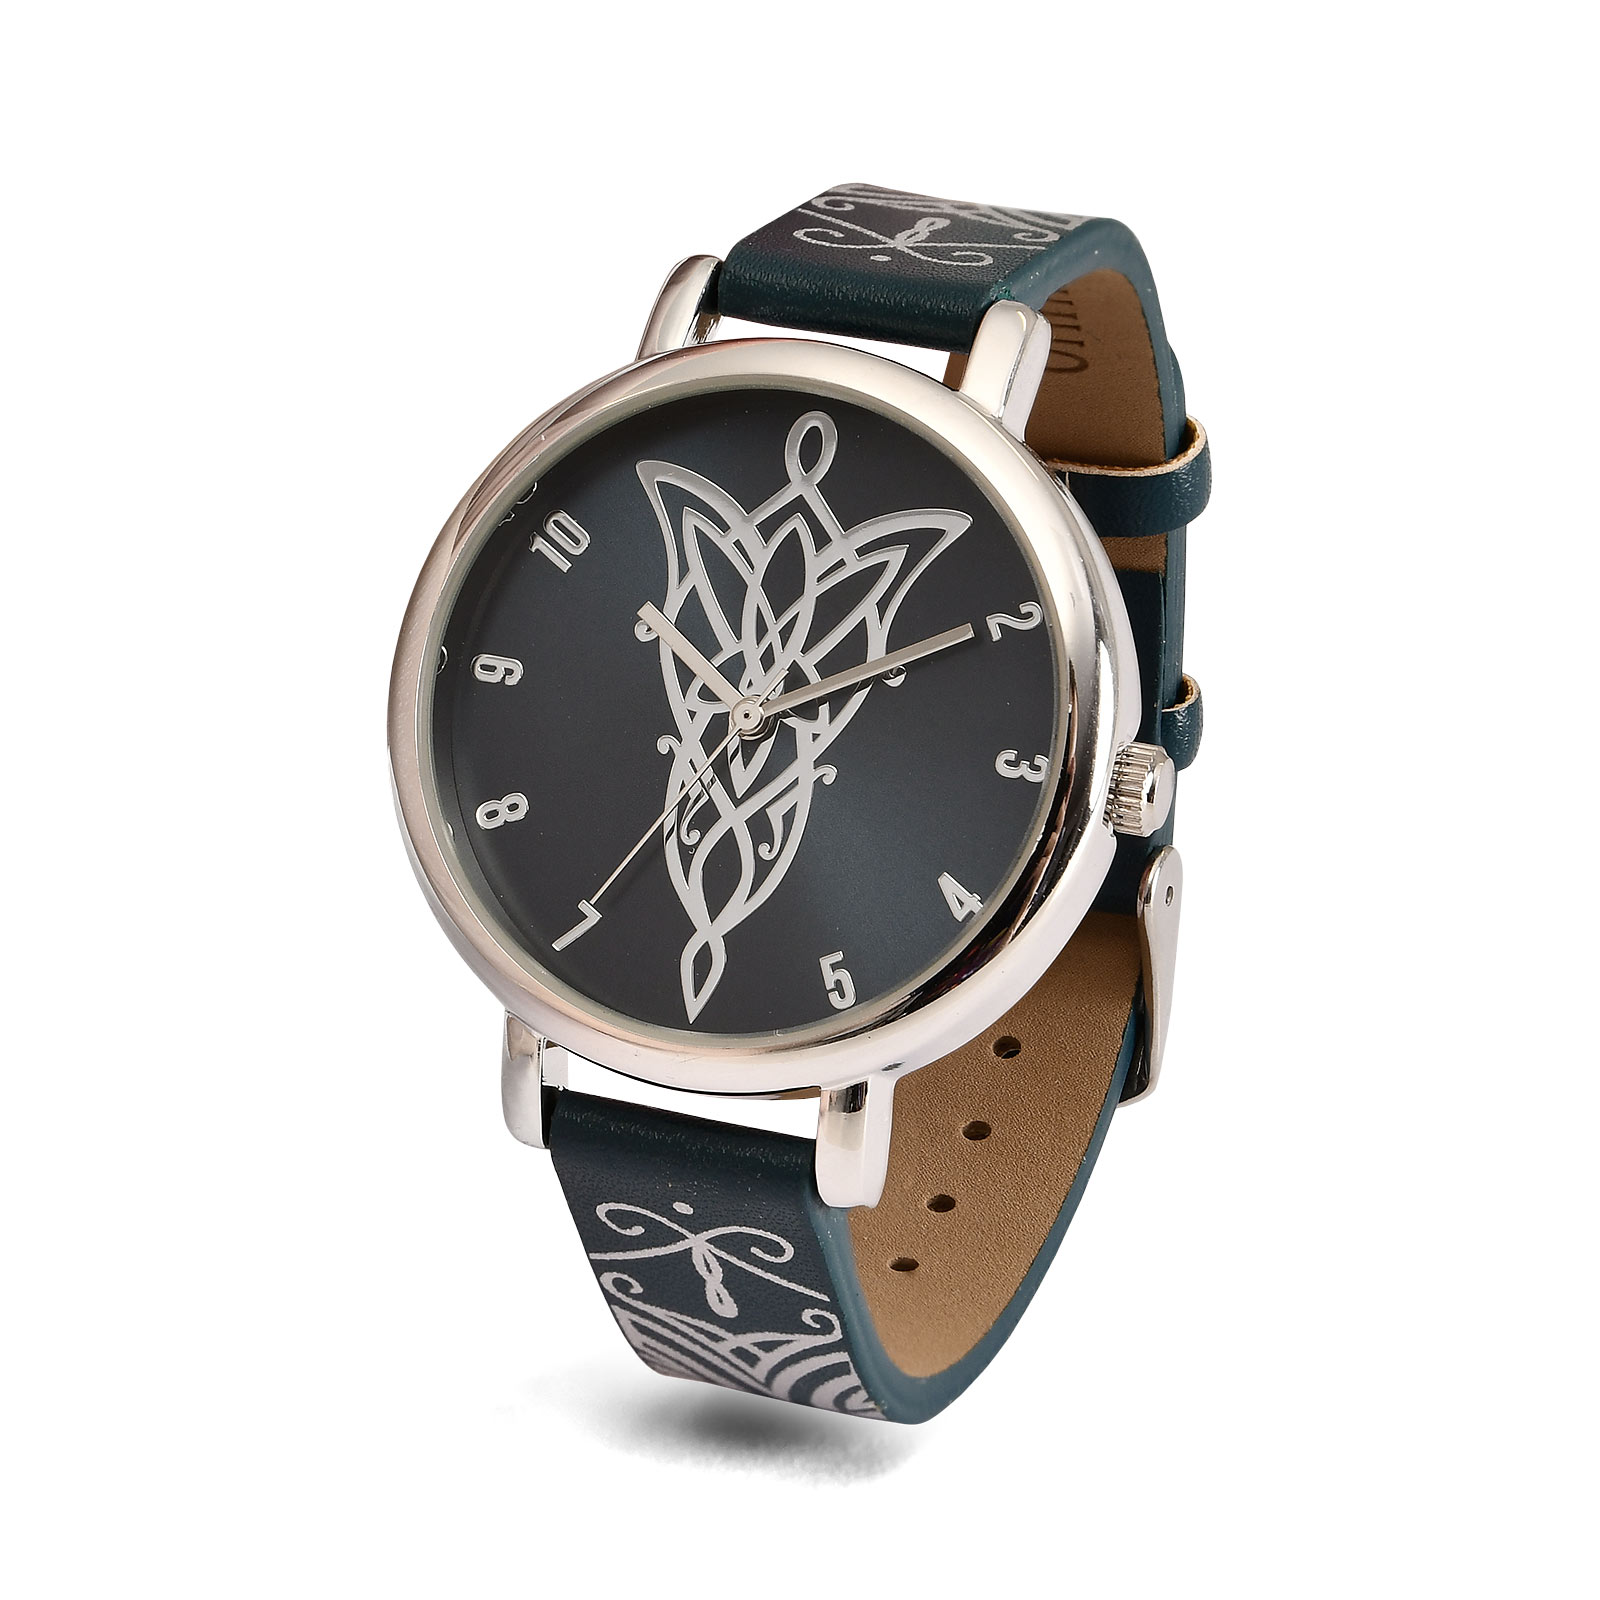 Lord of the Rings - Arwen's Evenstar Watch